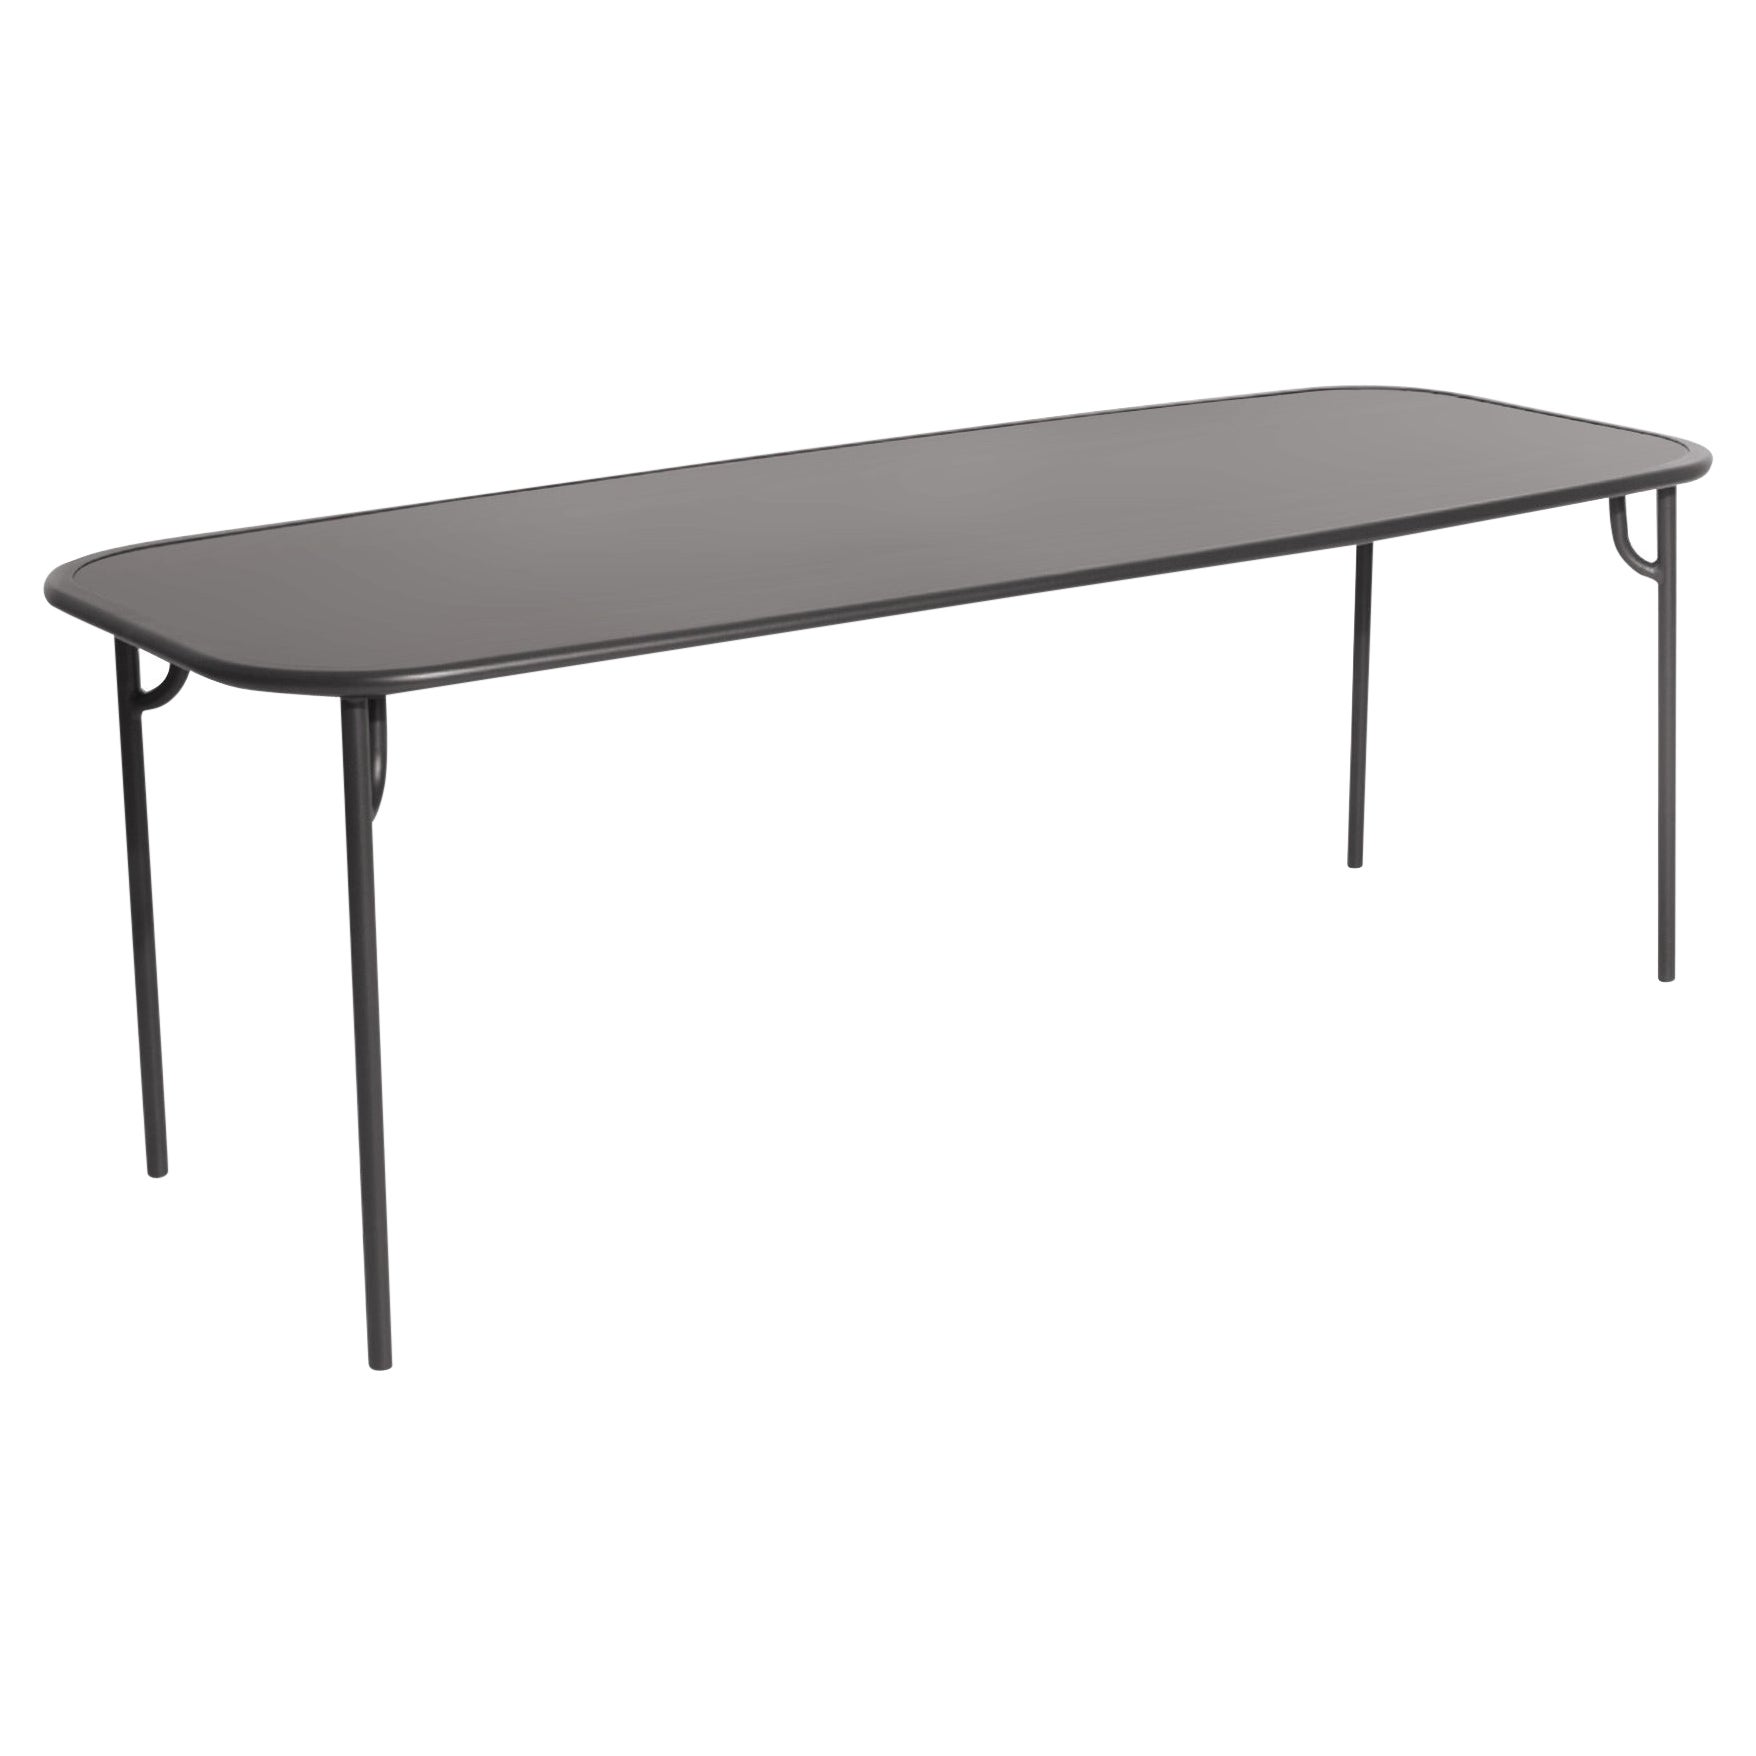 Petite Friture Week-End Large Plain Rectangular Dining Table in Anthracite For Sale